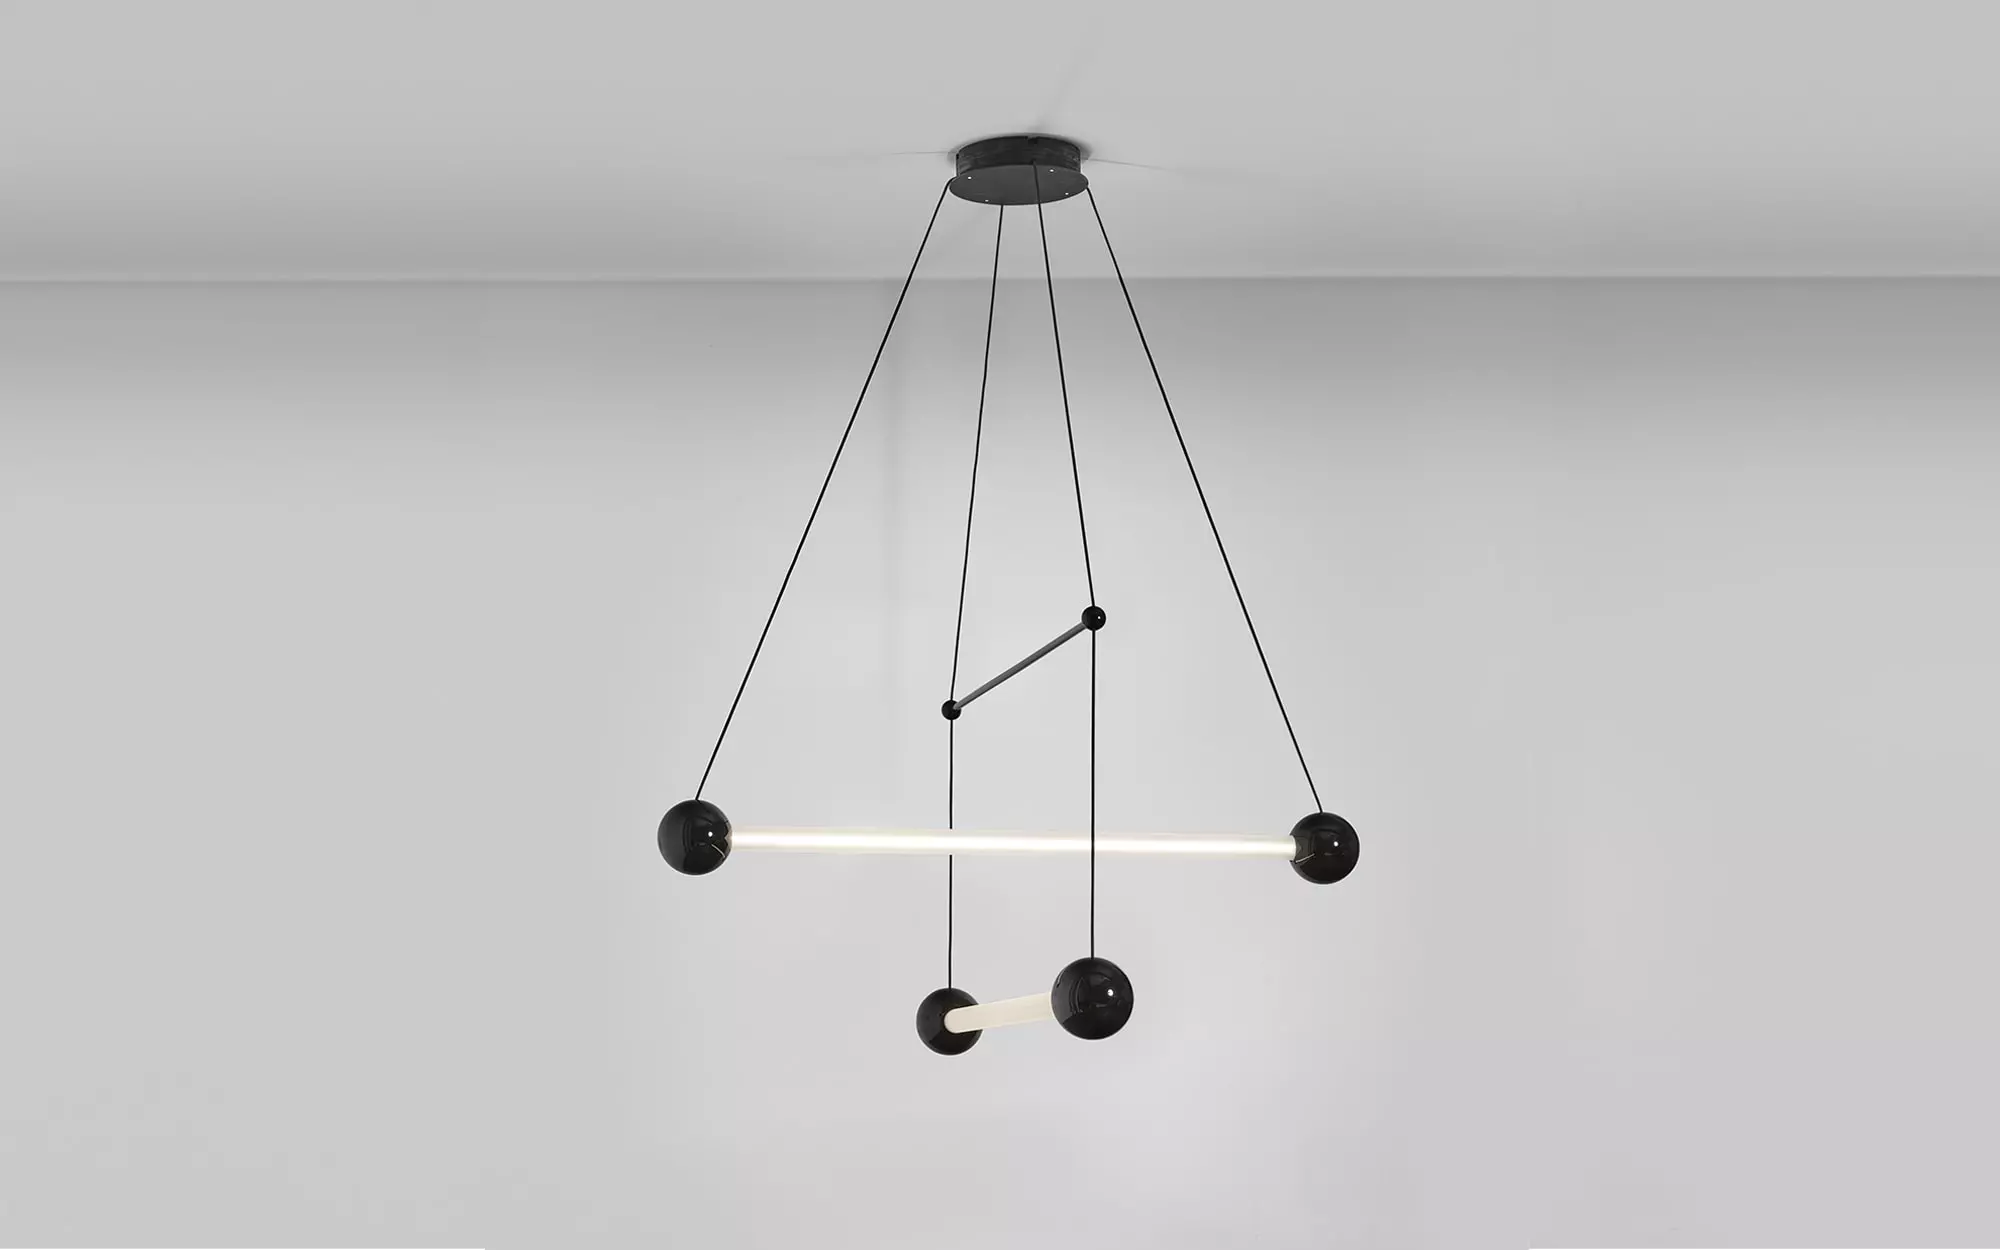 Trapeze 2 Ceiling light - Pierre Charpin - Console - Galerie kreo